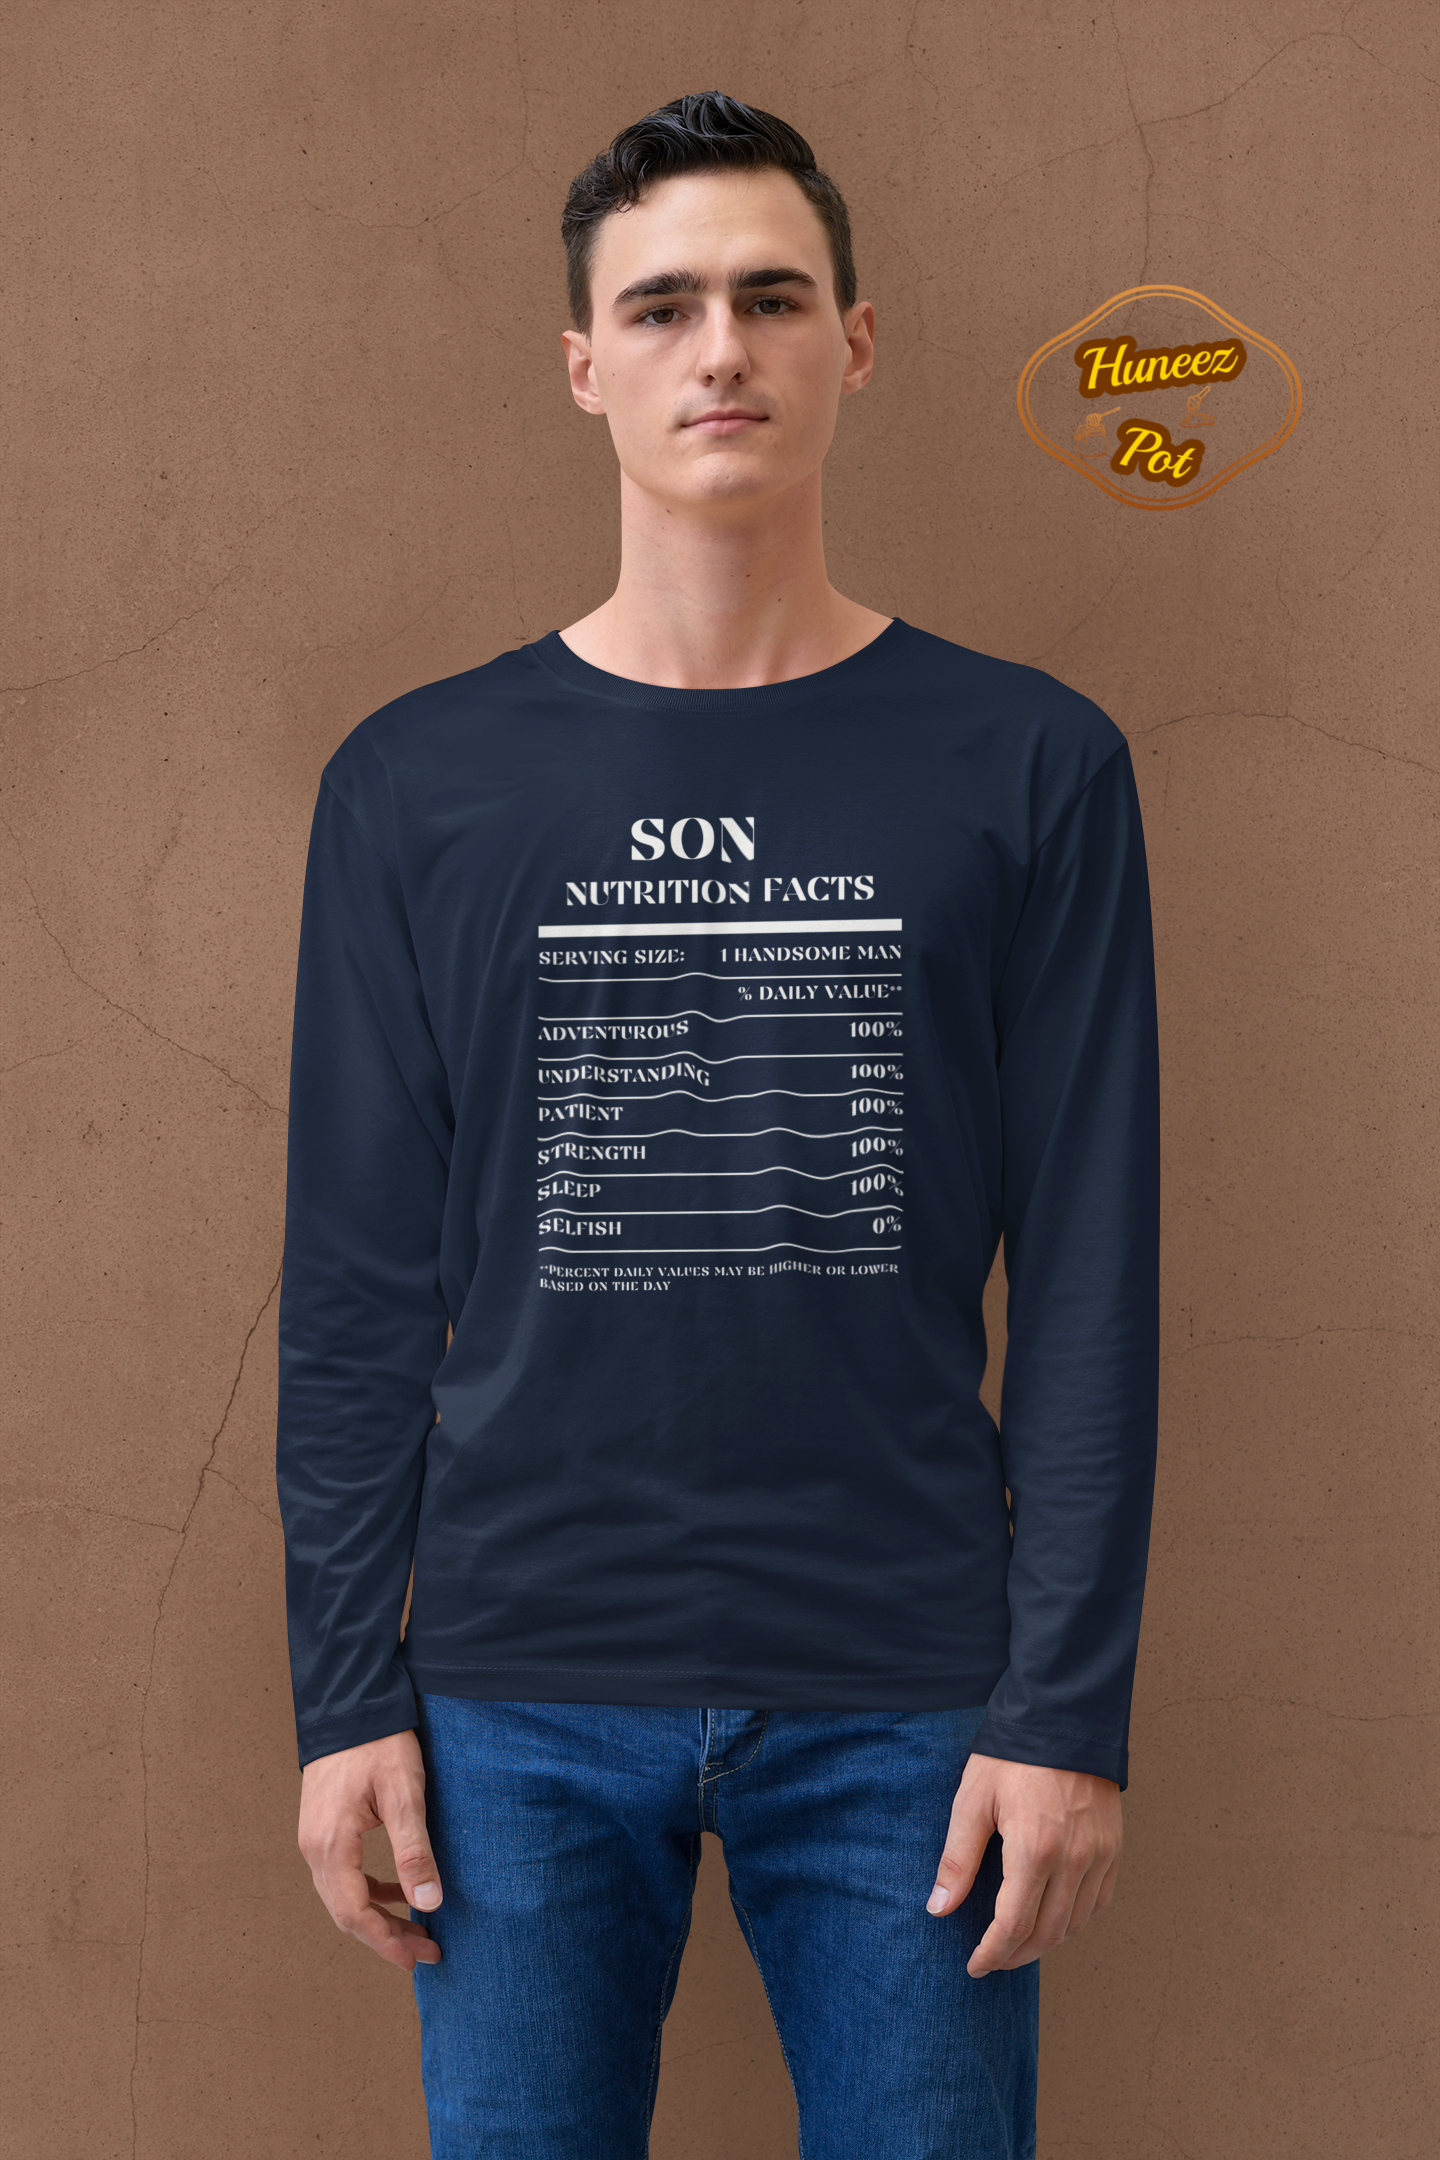 Nutrition Facts T-Shirt LS - Son - White